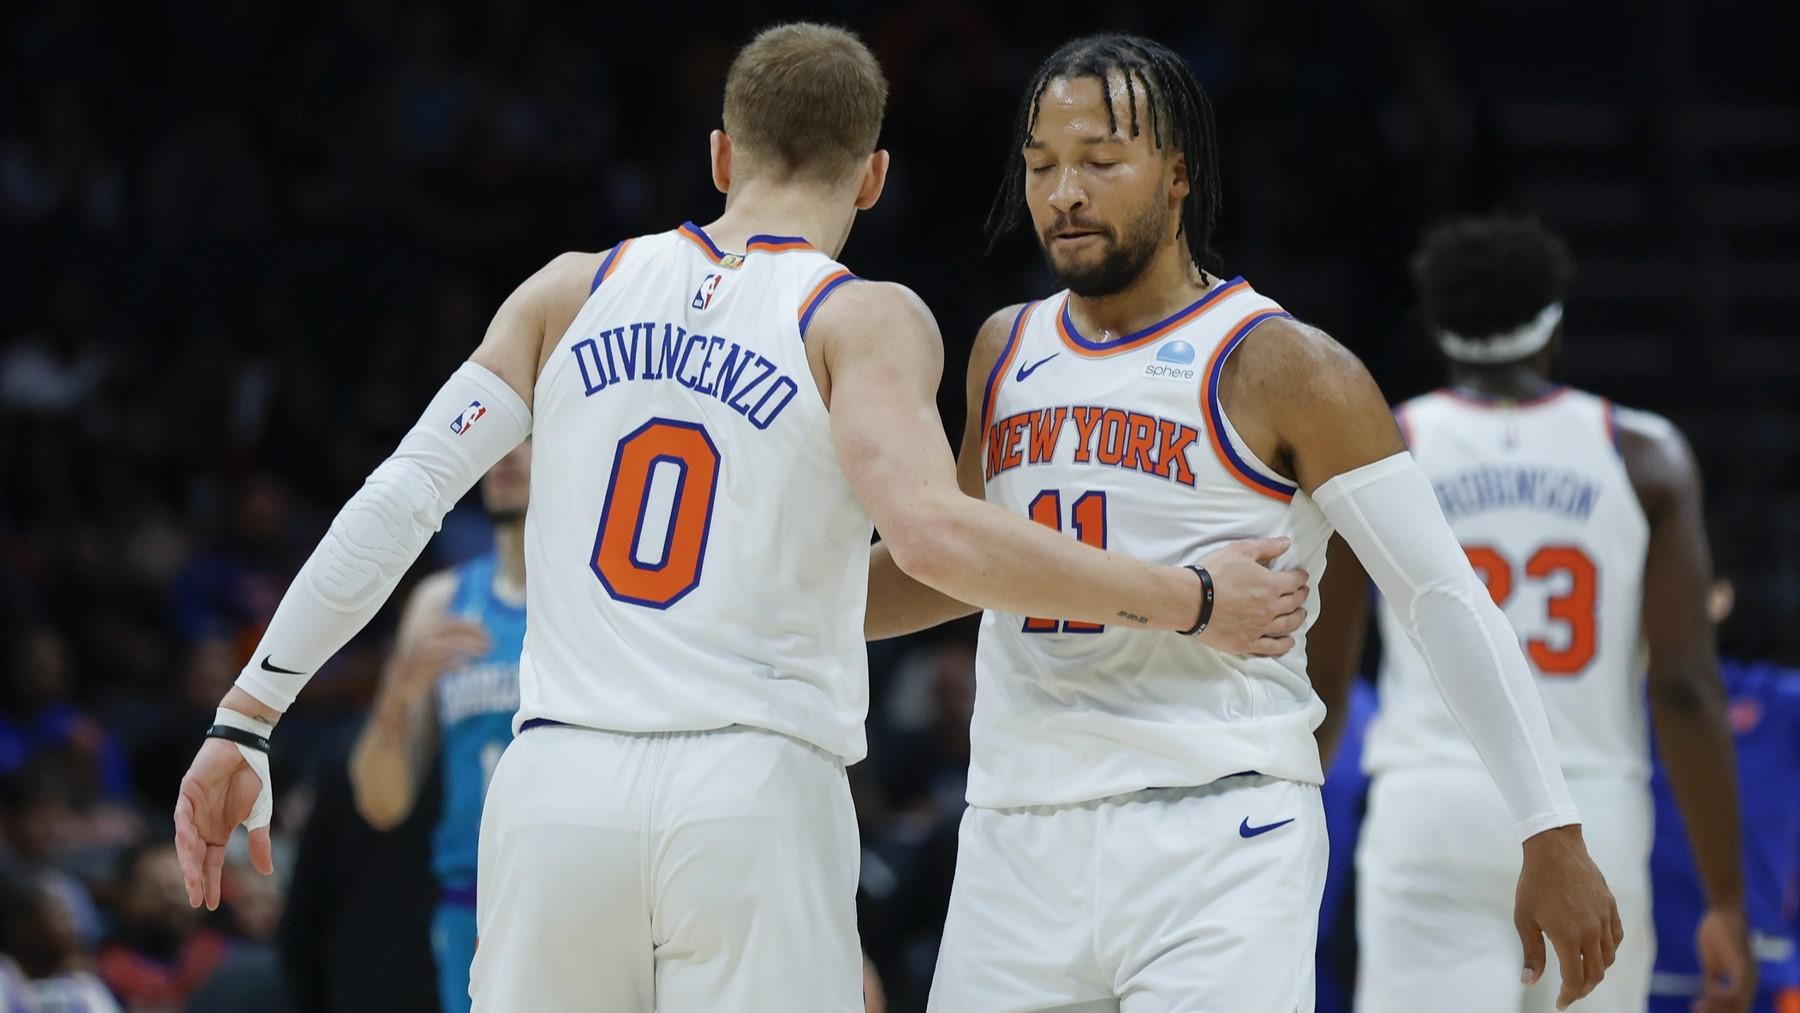 Nov 18, 2023; Charlotte, North Carolina, USA; New York Knicks guard Jalen Brunson (11) embraces guard Donte DiVincenzo (0) during the first quarter against the Charlotte Hornets at Spectrum Center. / Nell Redmond-USA TODAY Sports